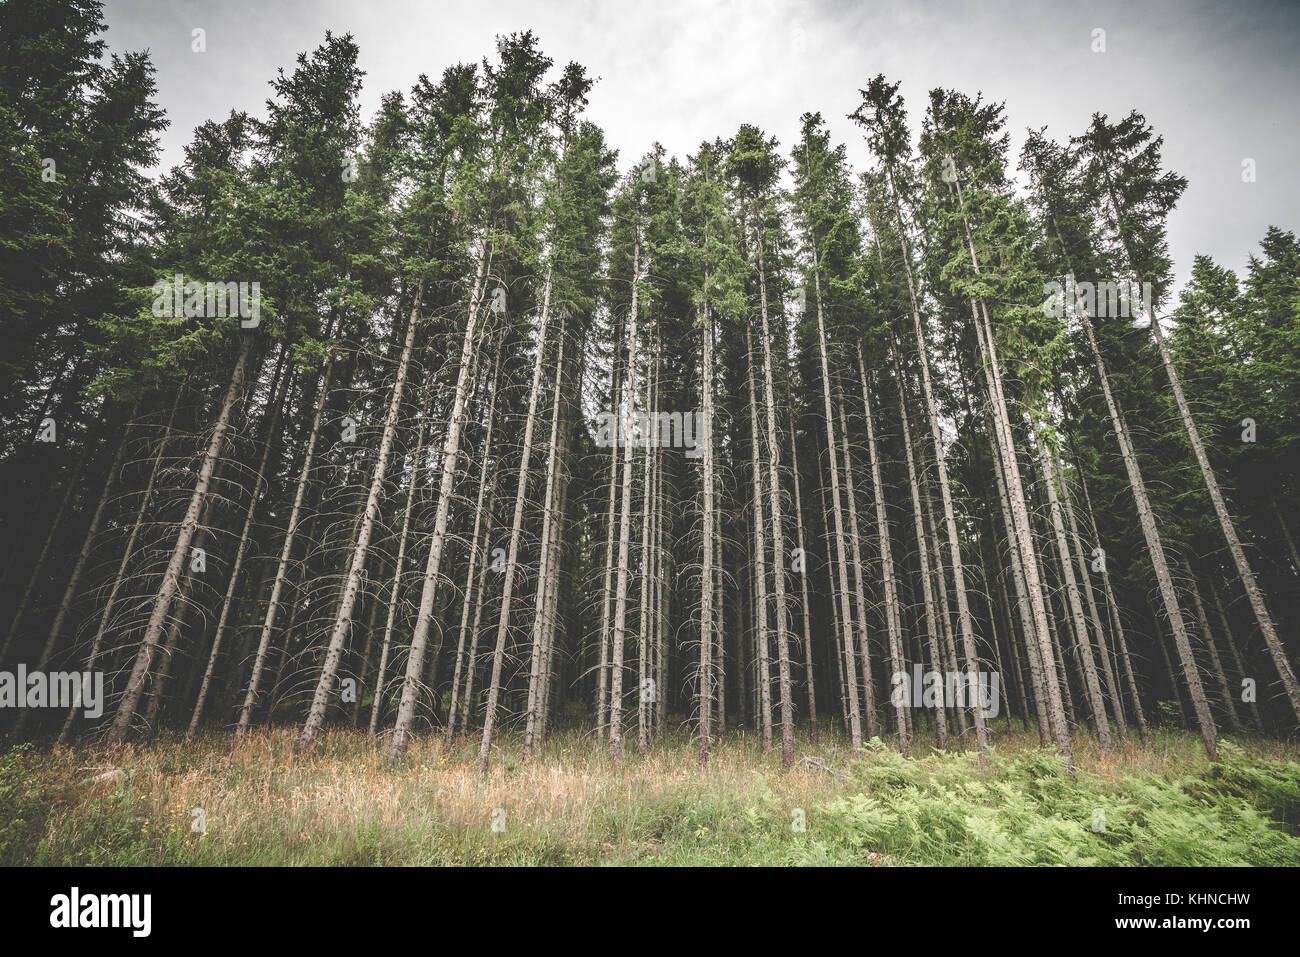 Tall pine tree forest with spooky withered branches in the dark woods in cloudy weather Stock Photo